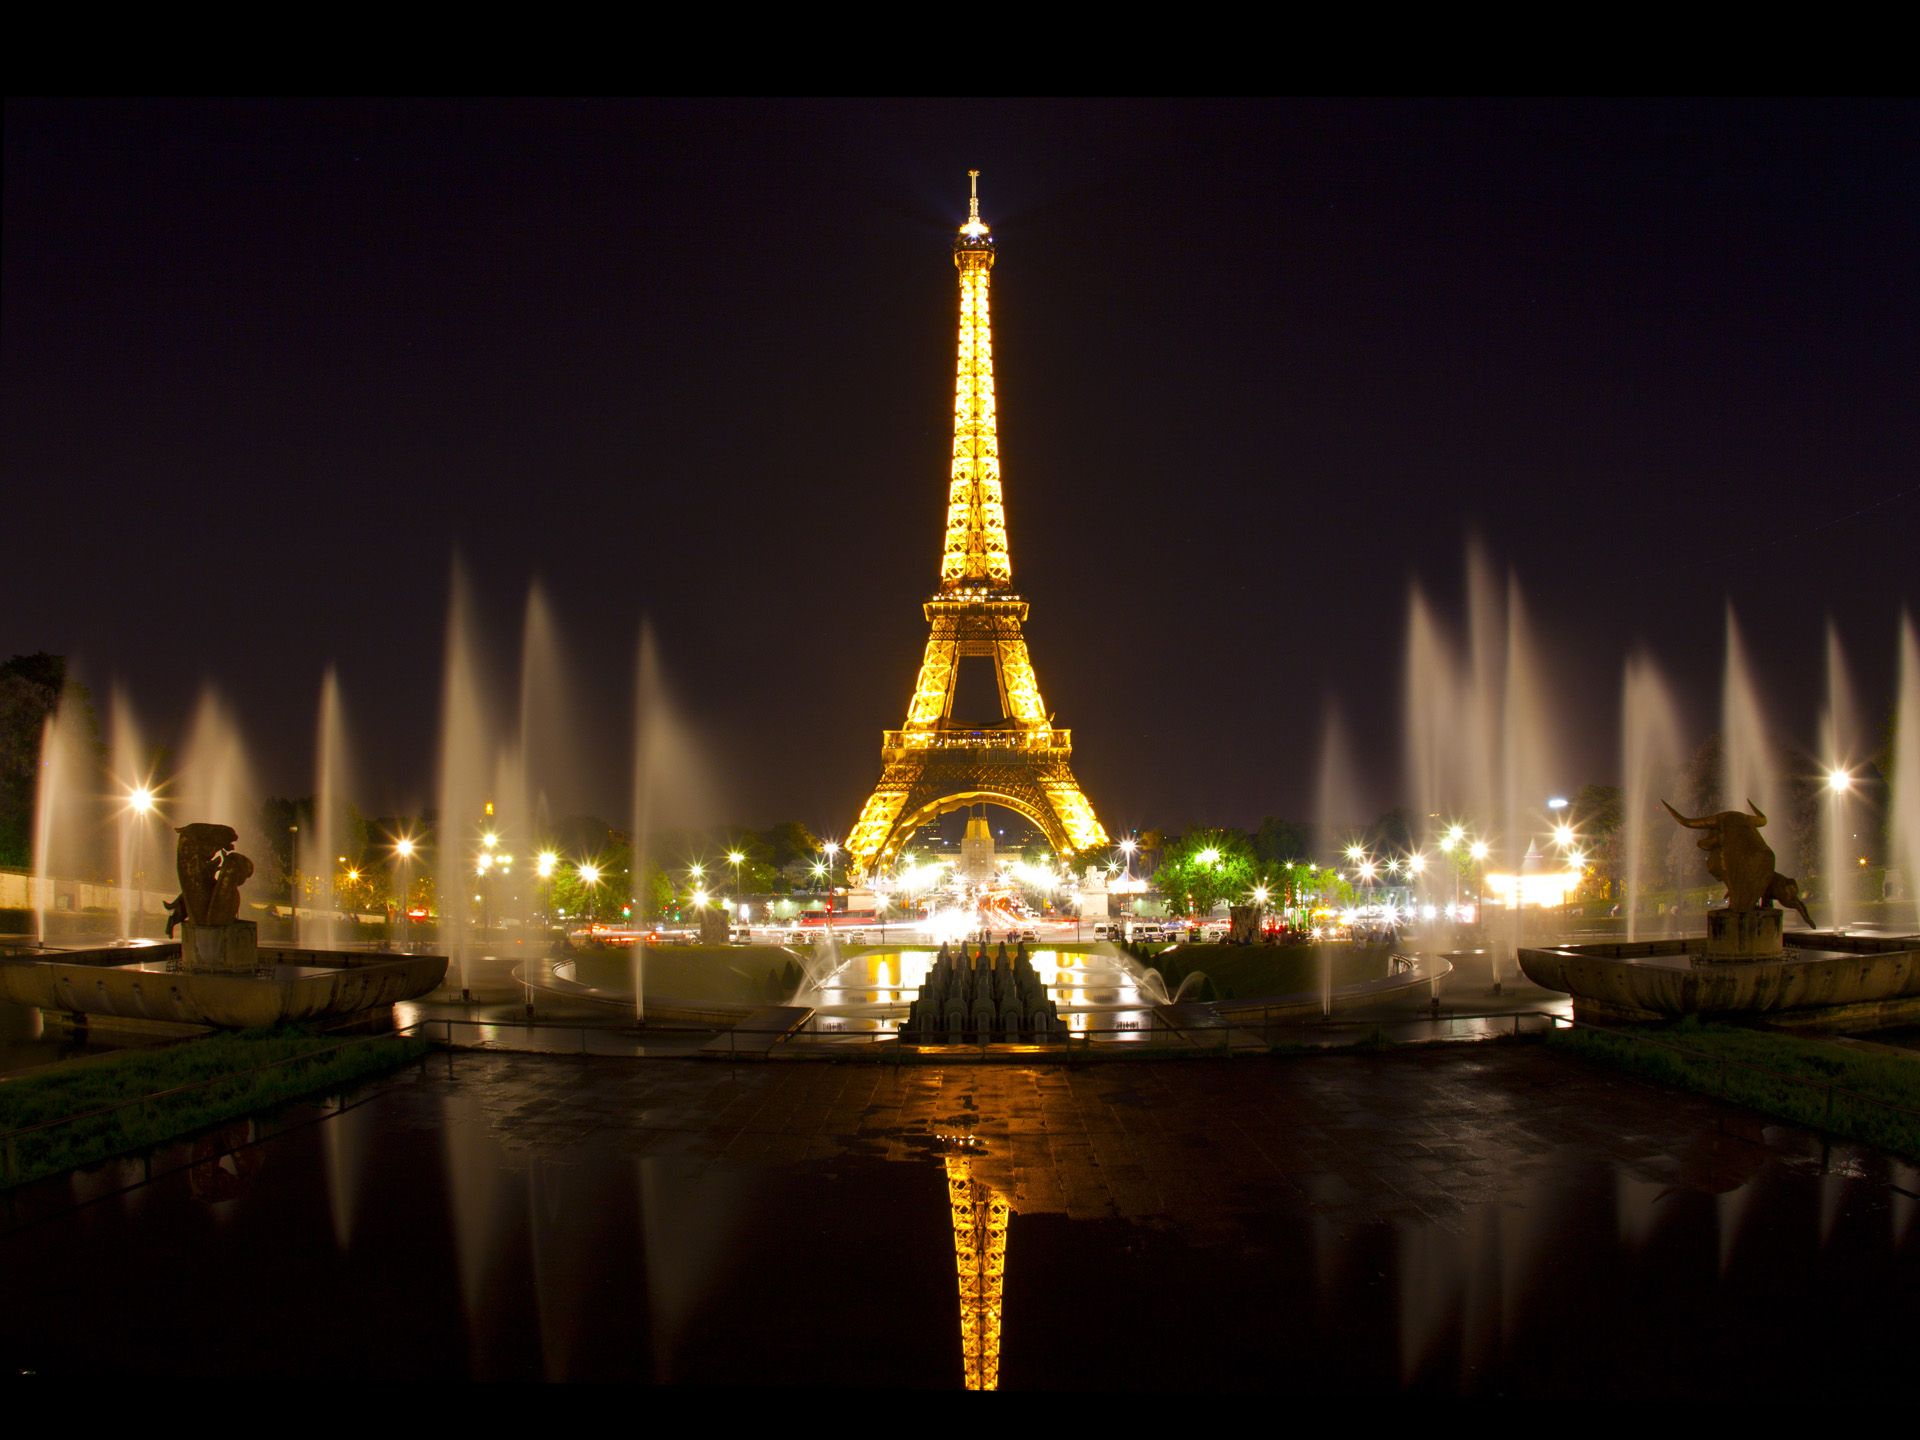 Sharing Photos Of Eiffel Tower Clicked At Night Is Now Illegal